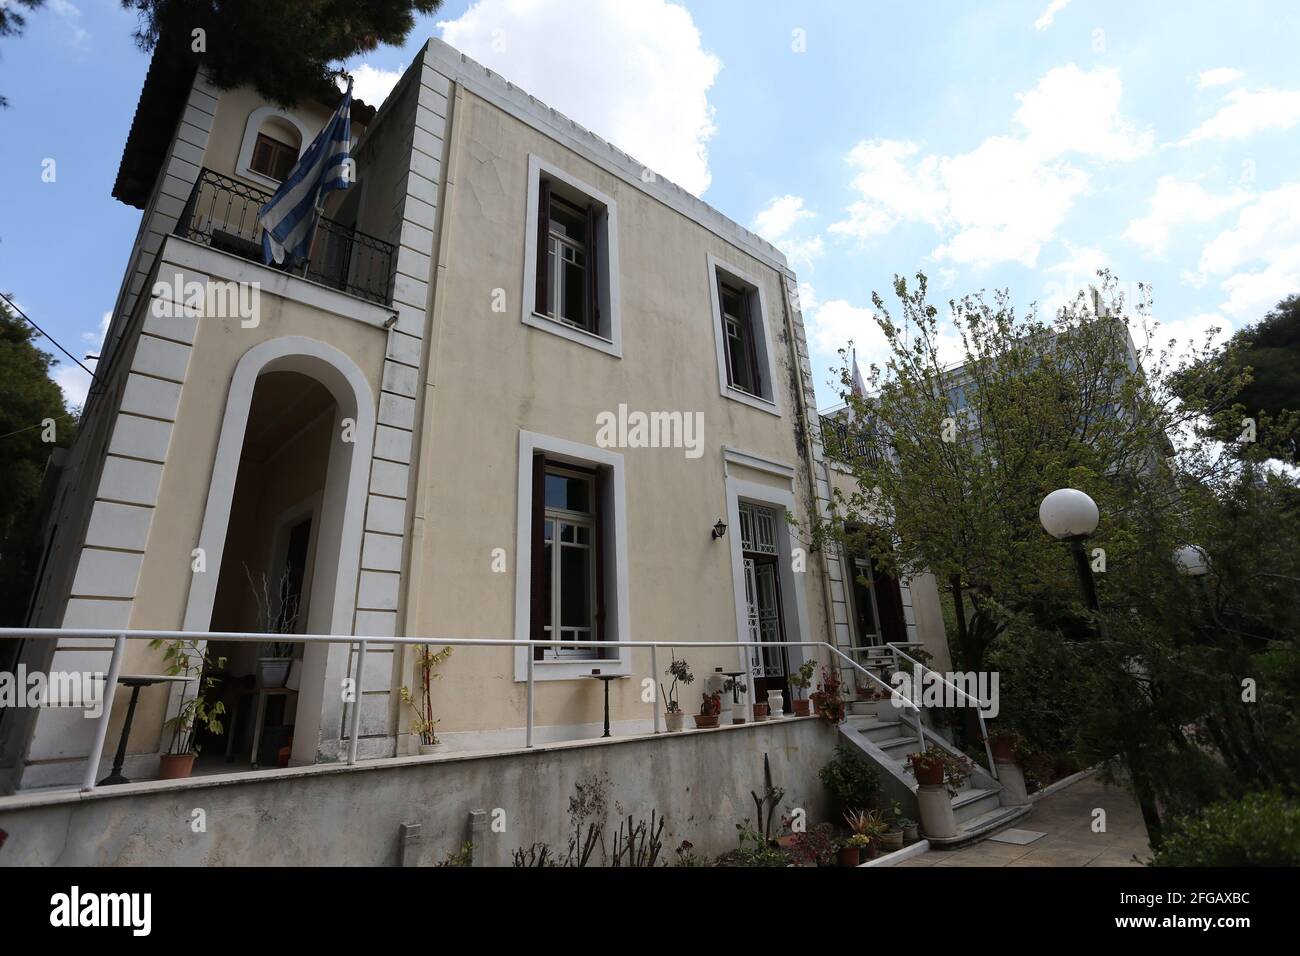 Summer Residence of Princess Alice of Greece at Neo Heraclion district in Athens.  Princess Alice of Battenberg was the mother of Prince Philip and mother-in-law of Queen Elizabeth II. After marrying Prince Andrew of Greece and Denmark in 1903, she adopted the style of her husband, becoming Princess Andrew of Greece and Denmark. She lived in Greece until the exile of most of the Greek royal family in 1917. On returning to Greece a few years later, her husband was blamed in part for the country's defeat in the Greco-Turkish War (1919–1922), and the family was once again forced into exile until Stock Photo